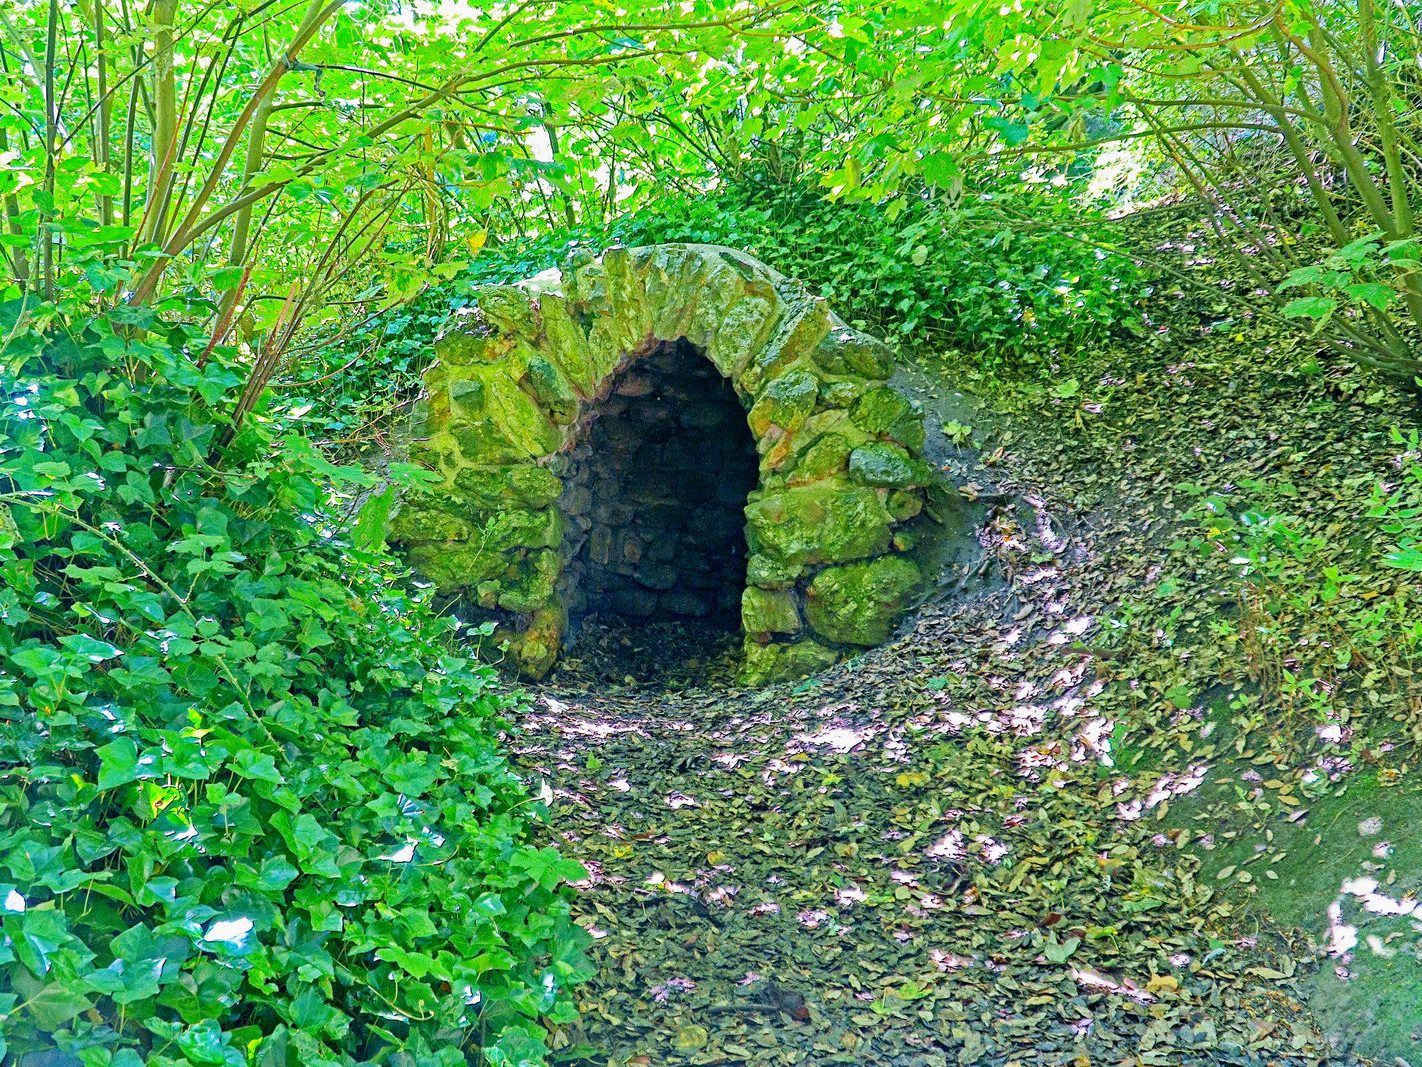 ST ANN'S WELL AT ST ANNE'S PARK [A HOLY WELL NOW DESCRIBED AS A WISHING WELL] 006